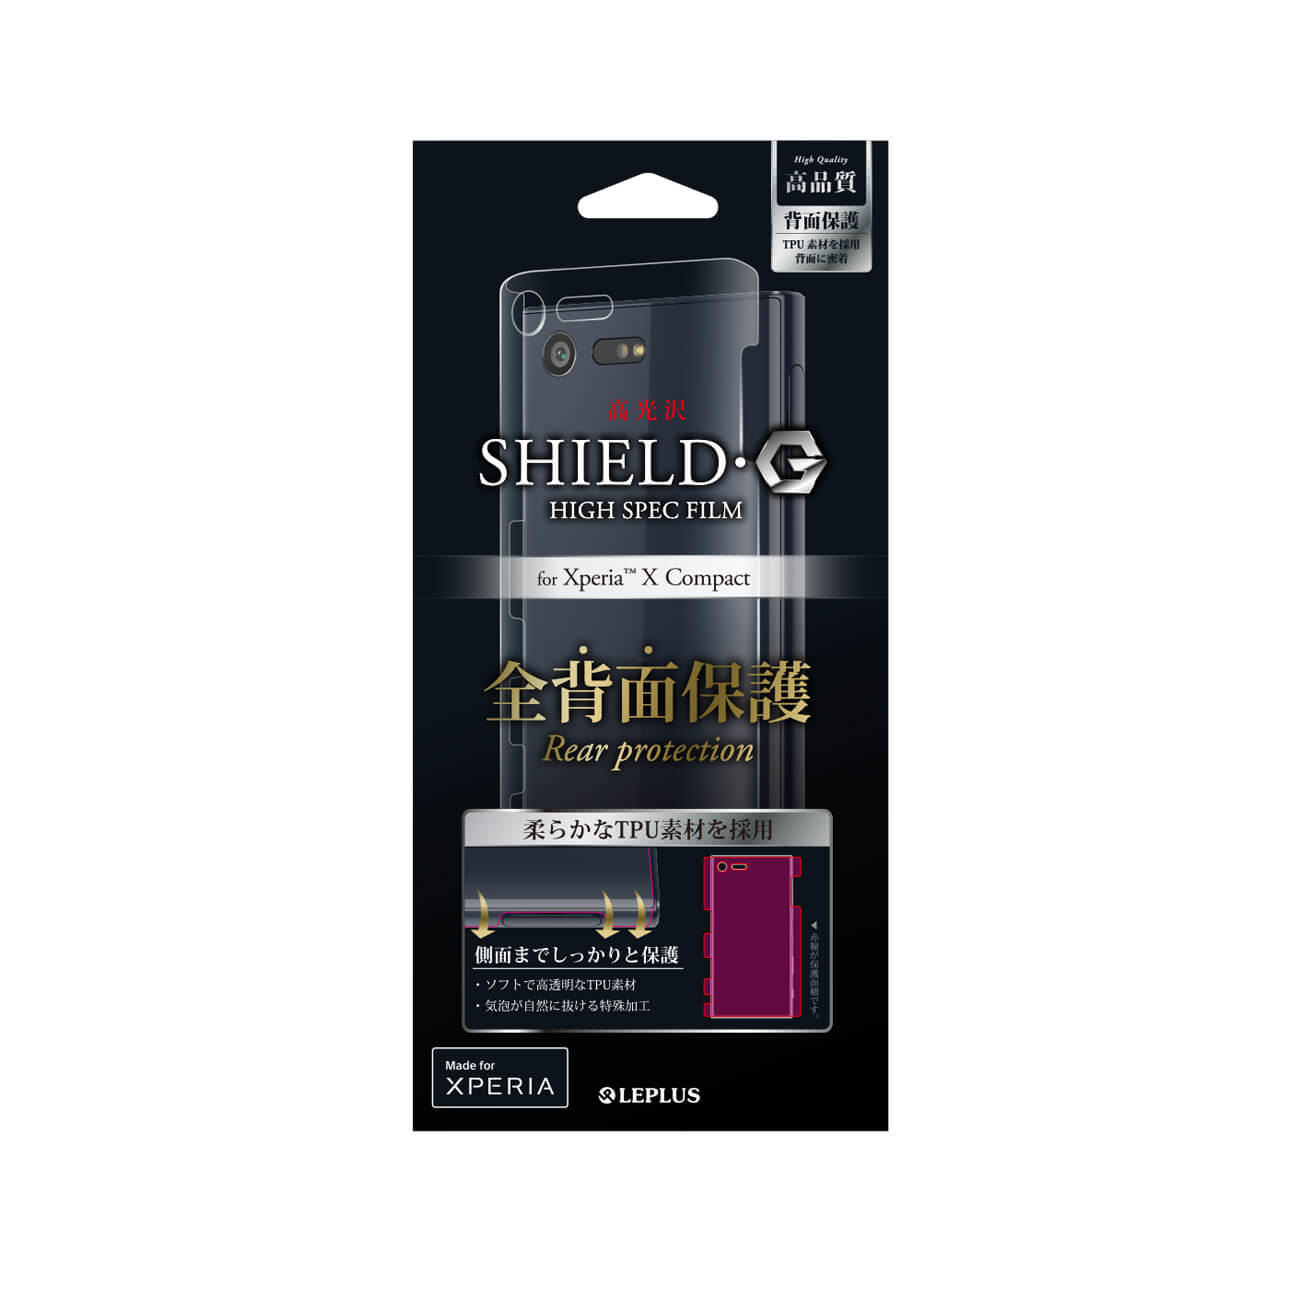 Xperia(TM) X Compact SO-02J 保護フィルム 「SHIELD・G HIGH SPEC FILM」 全背面保護 光沢